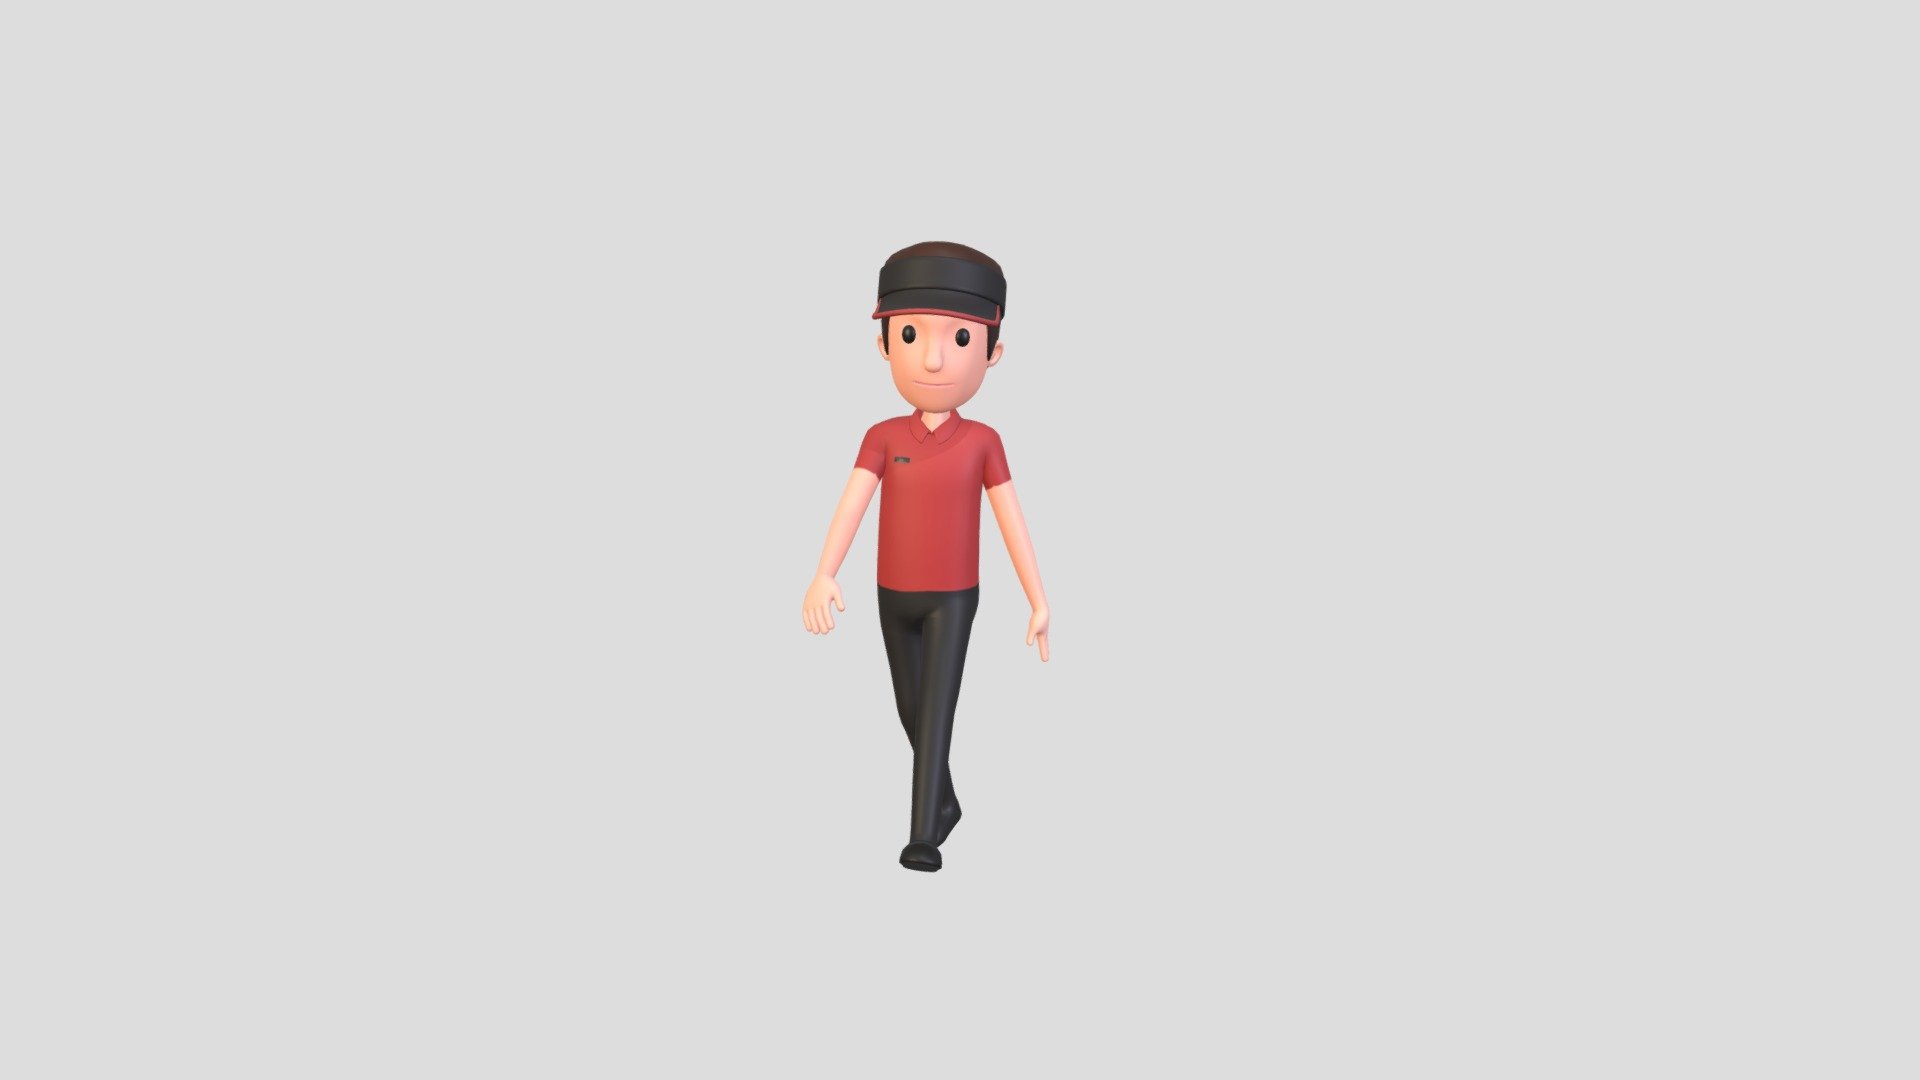 Rigged Fast Food Worker Character 3d model.      
    


File Format      
 
- 3ds max 2021  
 
- FBX  
 
- OBJ  
    


Clean topology    

Rig with CAT in 3ds Max                          

Bone and Weight skin are in fbx file                 

No Facial Rig               

No Animation               

Non-overlapping unwrapped UVs        
 


PNG texture               

2048x2048                


- Base Color                        

- Normal                        

- Roughness                         



7,538 polygons                          

7,491 vertexs                          
 - Character175 Rigged Fast Food Worker - Buy Royalty Free 3D model by BaluCG 3d model